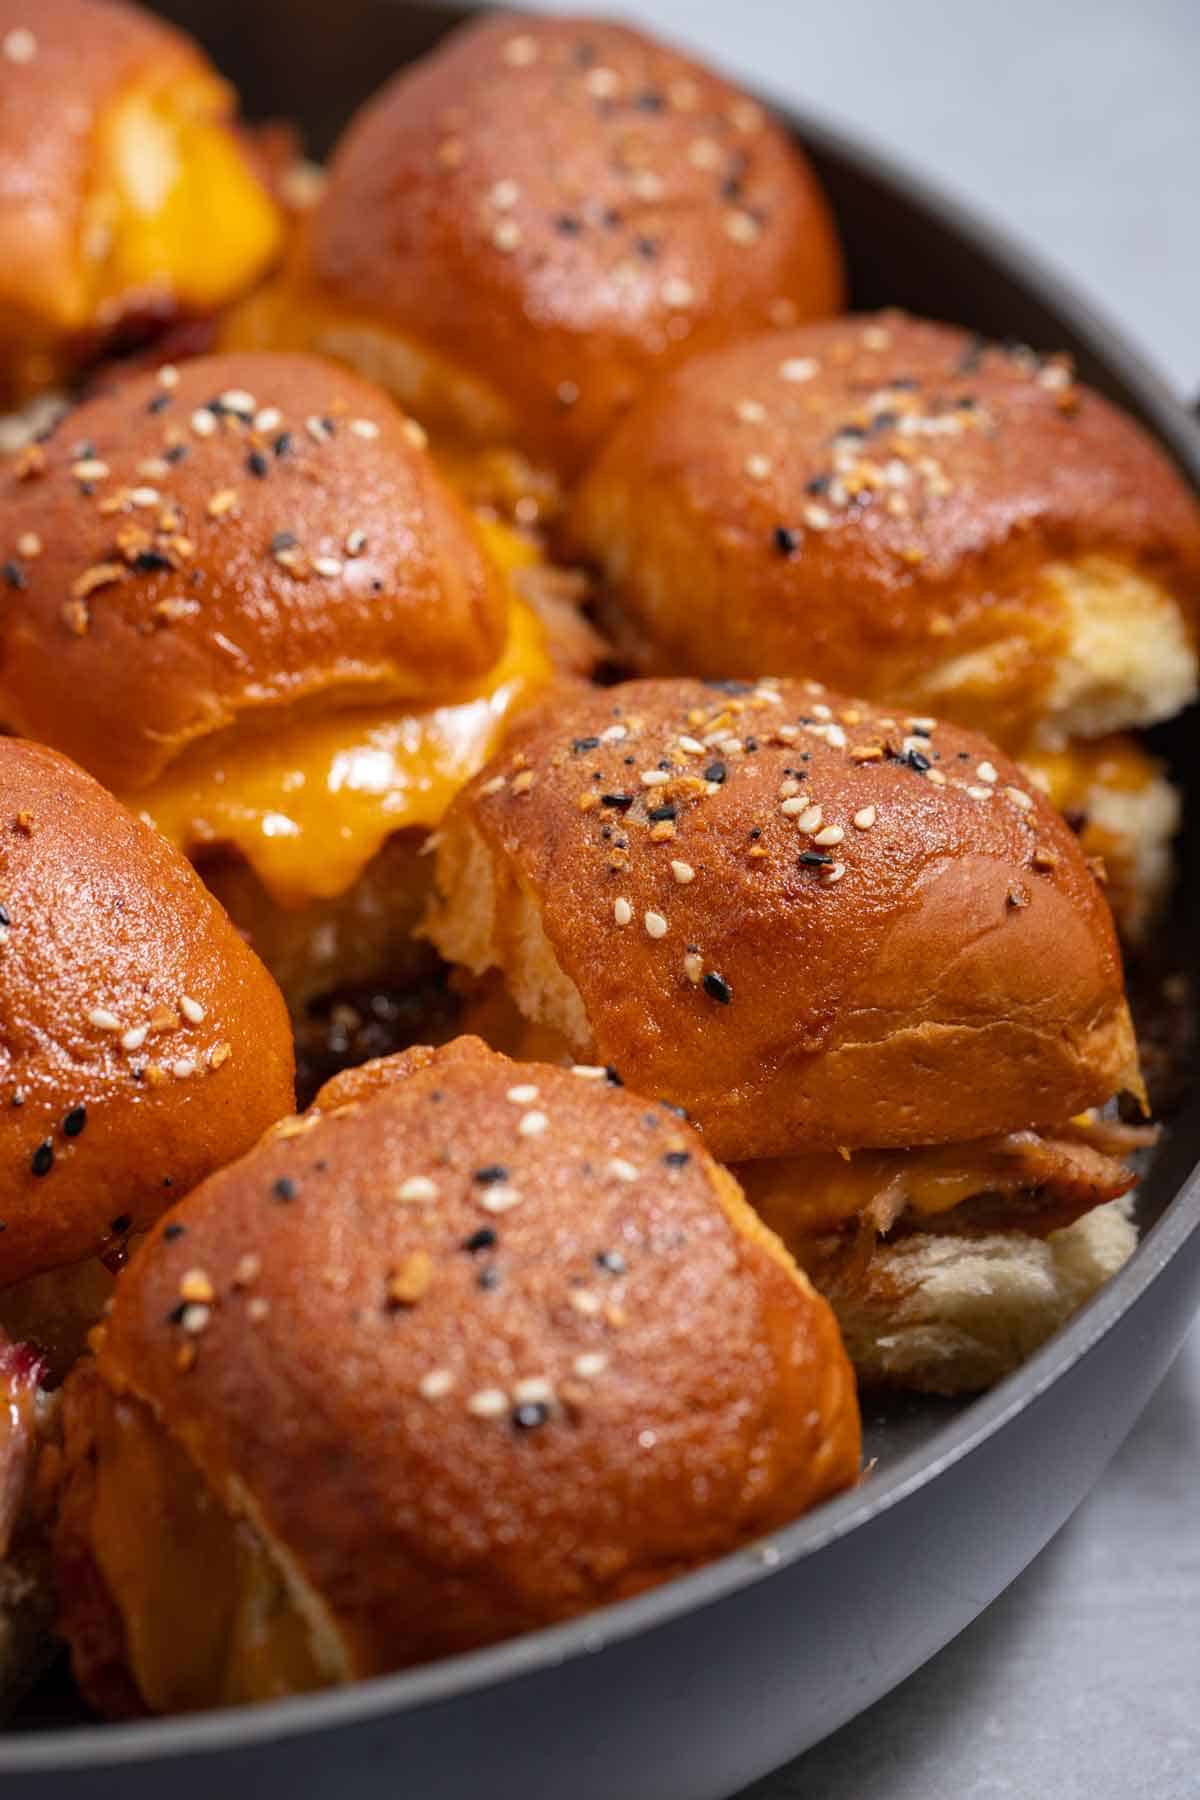 Pan of pulled pork sliders with cheddar cheese and pickled jalapeno peppers.